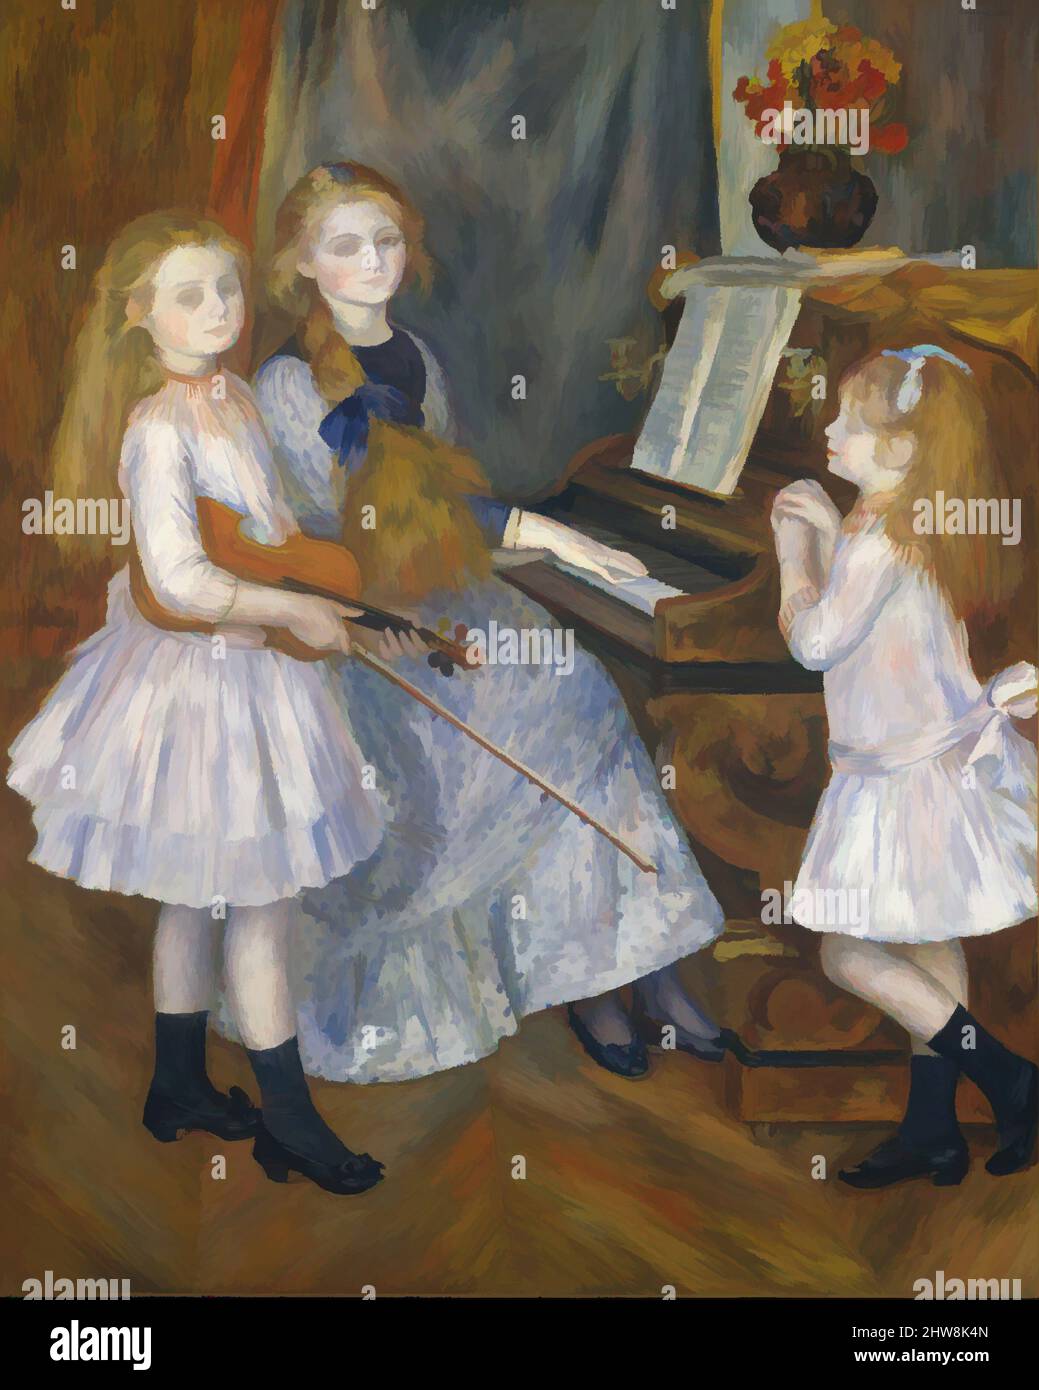 Art inspired by The Daughters of Catulle Mendès, Huguette (1871–1964), Claudine (1876–1937), and Helyonne (1879–1955), 1888, Oil on canvas, 63 3/4 x 51 1/8 in. (161.9 x 129.9 cm), Paintings, Auguste Renoir (French, Limoges 1841–1919 Cagnes-sur-Mer), Hoping to recapture the success he, Classic works modernized by Artotop with a splash of modernity. Shapes, color and value, eye-catching visual impact on art. Emotions through freedom of artworks in a contemporary way. A timeless message pursuing a wildly creative new direction. Artists turning to the digital medium and creating the Artotop NFT Stock Photo